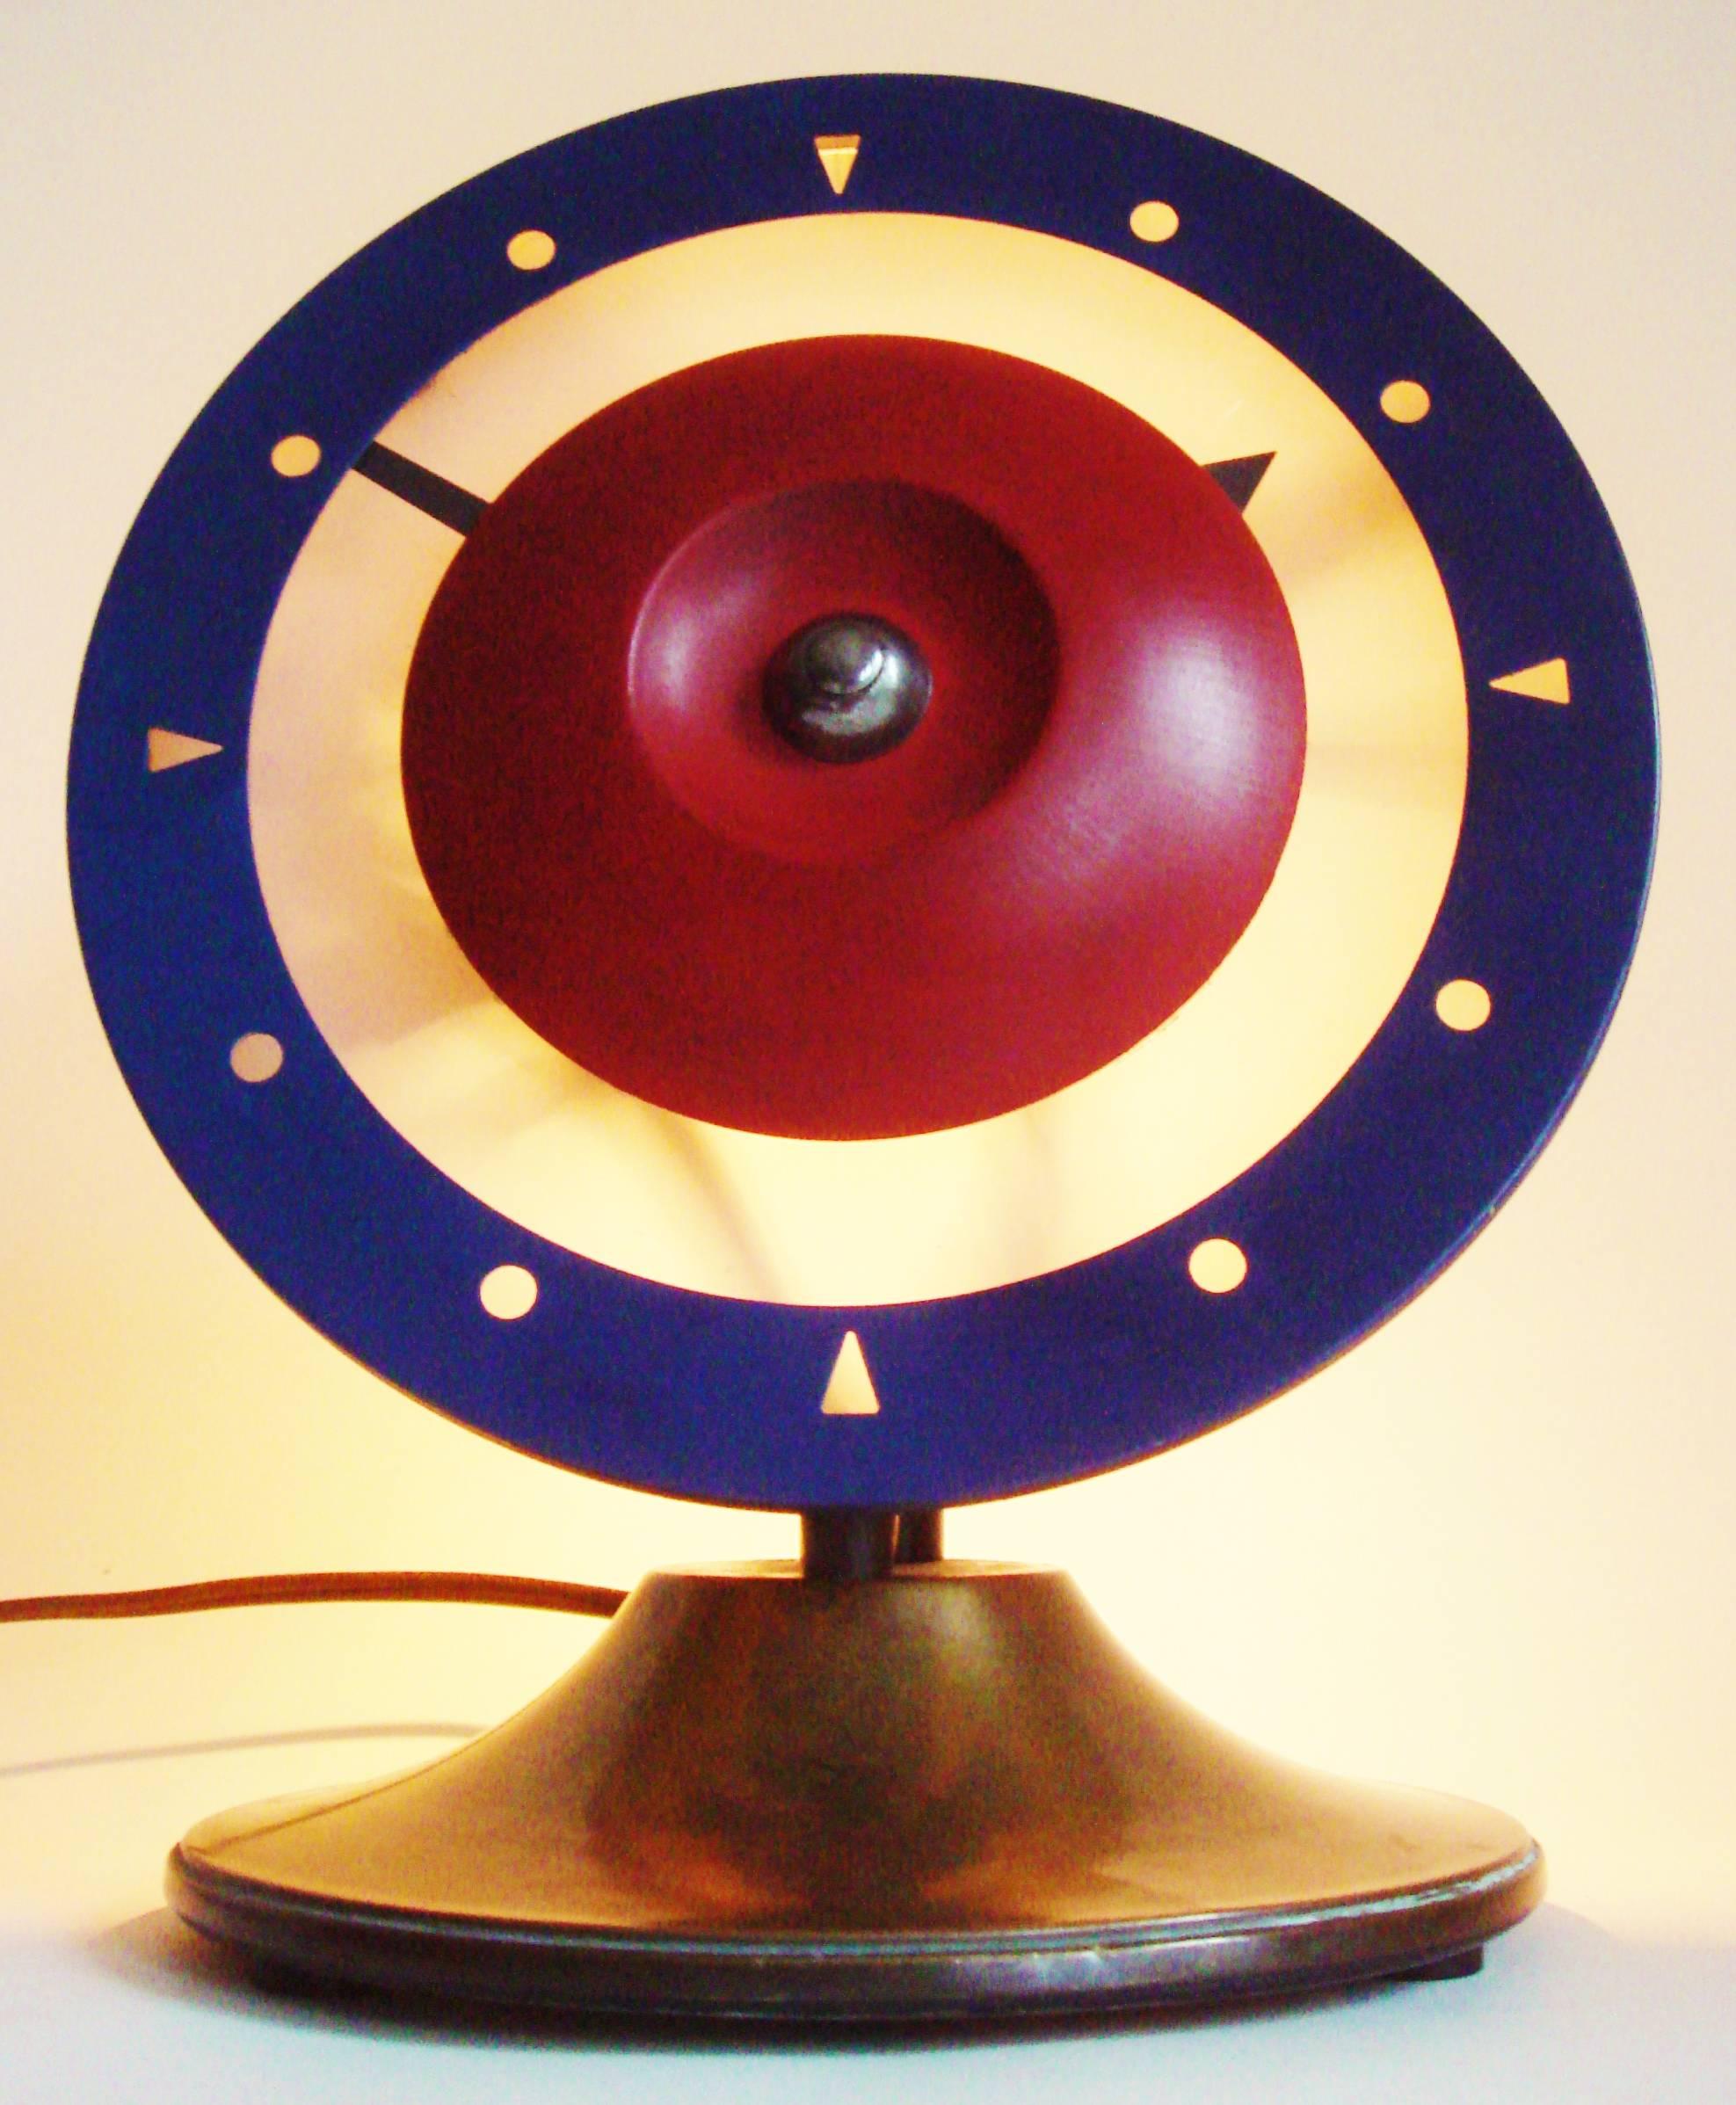 We have seen an example of this great looking Art Deco brass illuminated desk clock in England. It was described as a Royal Air Force desk clock owing to its tri-color R.A.F. roundel face but we have also heard them referred to as target clocks.